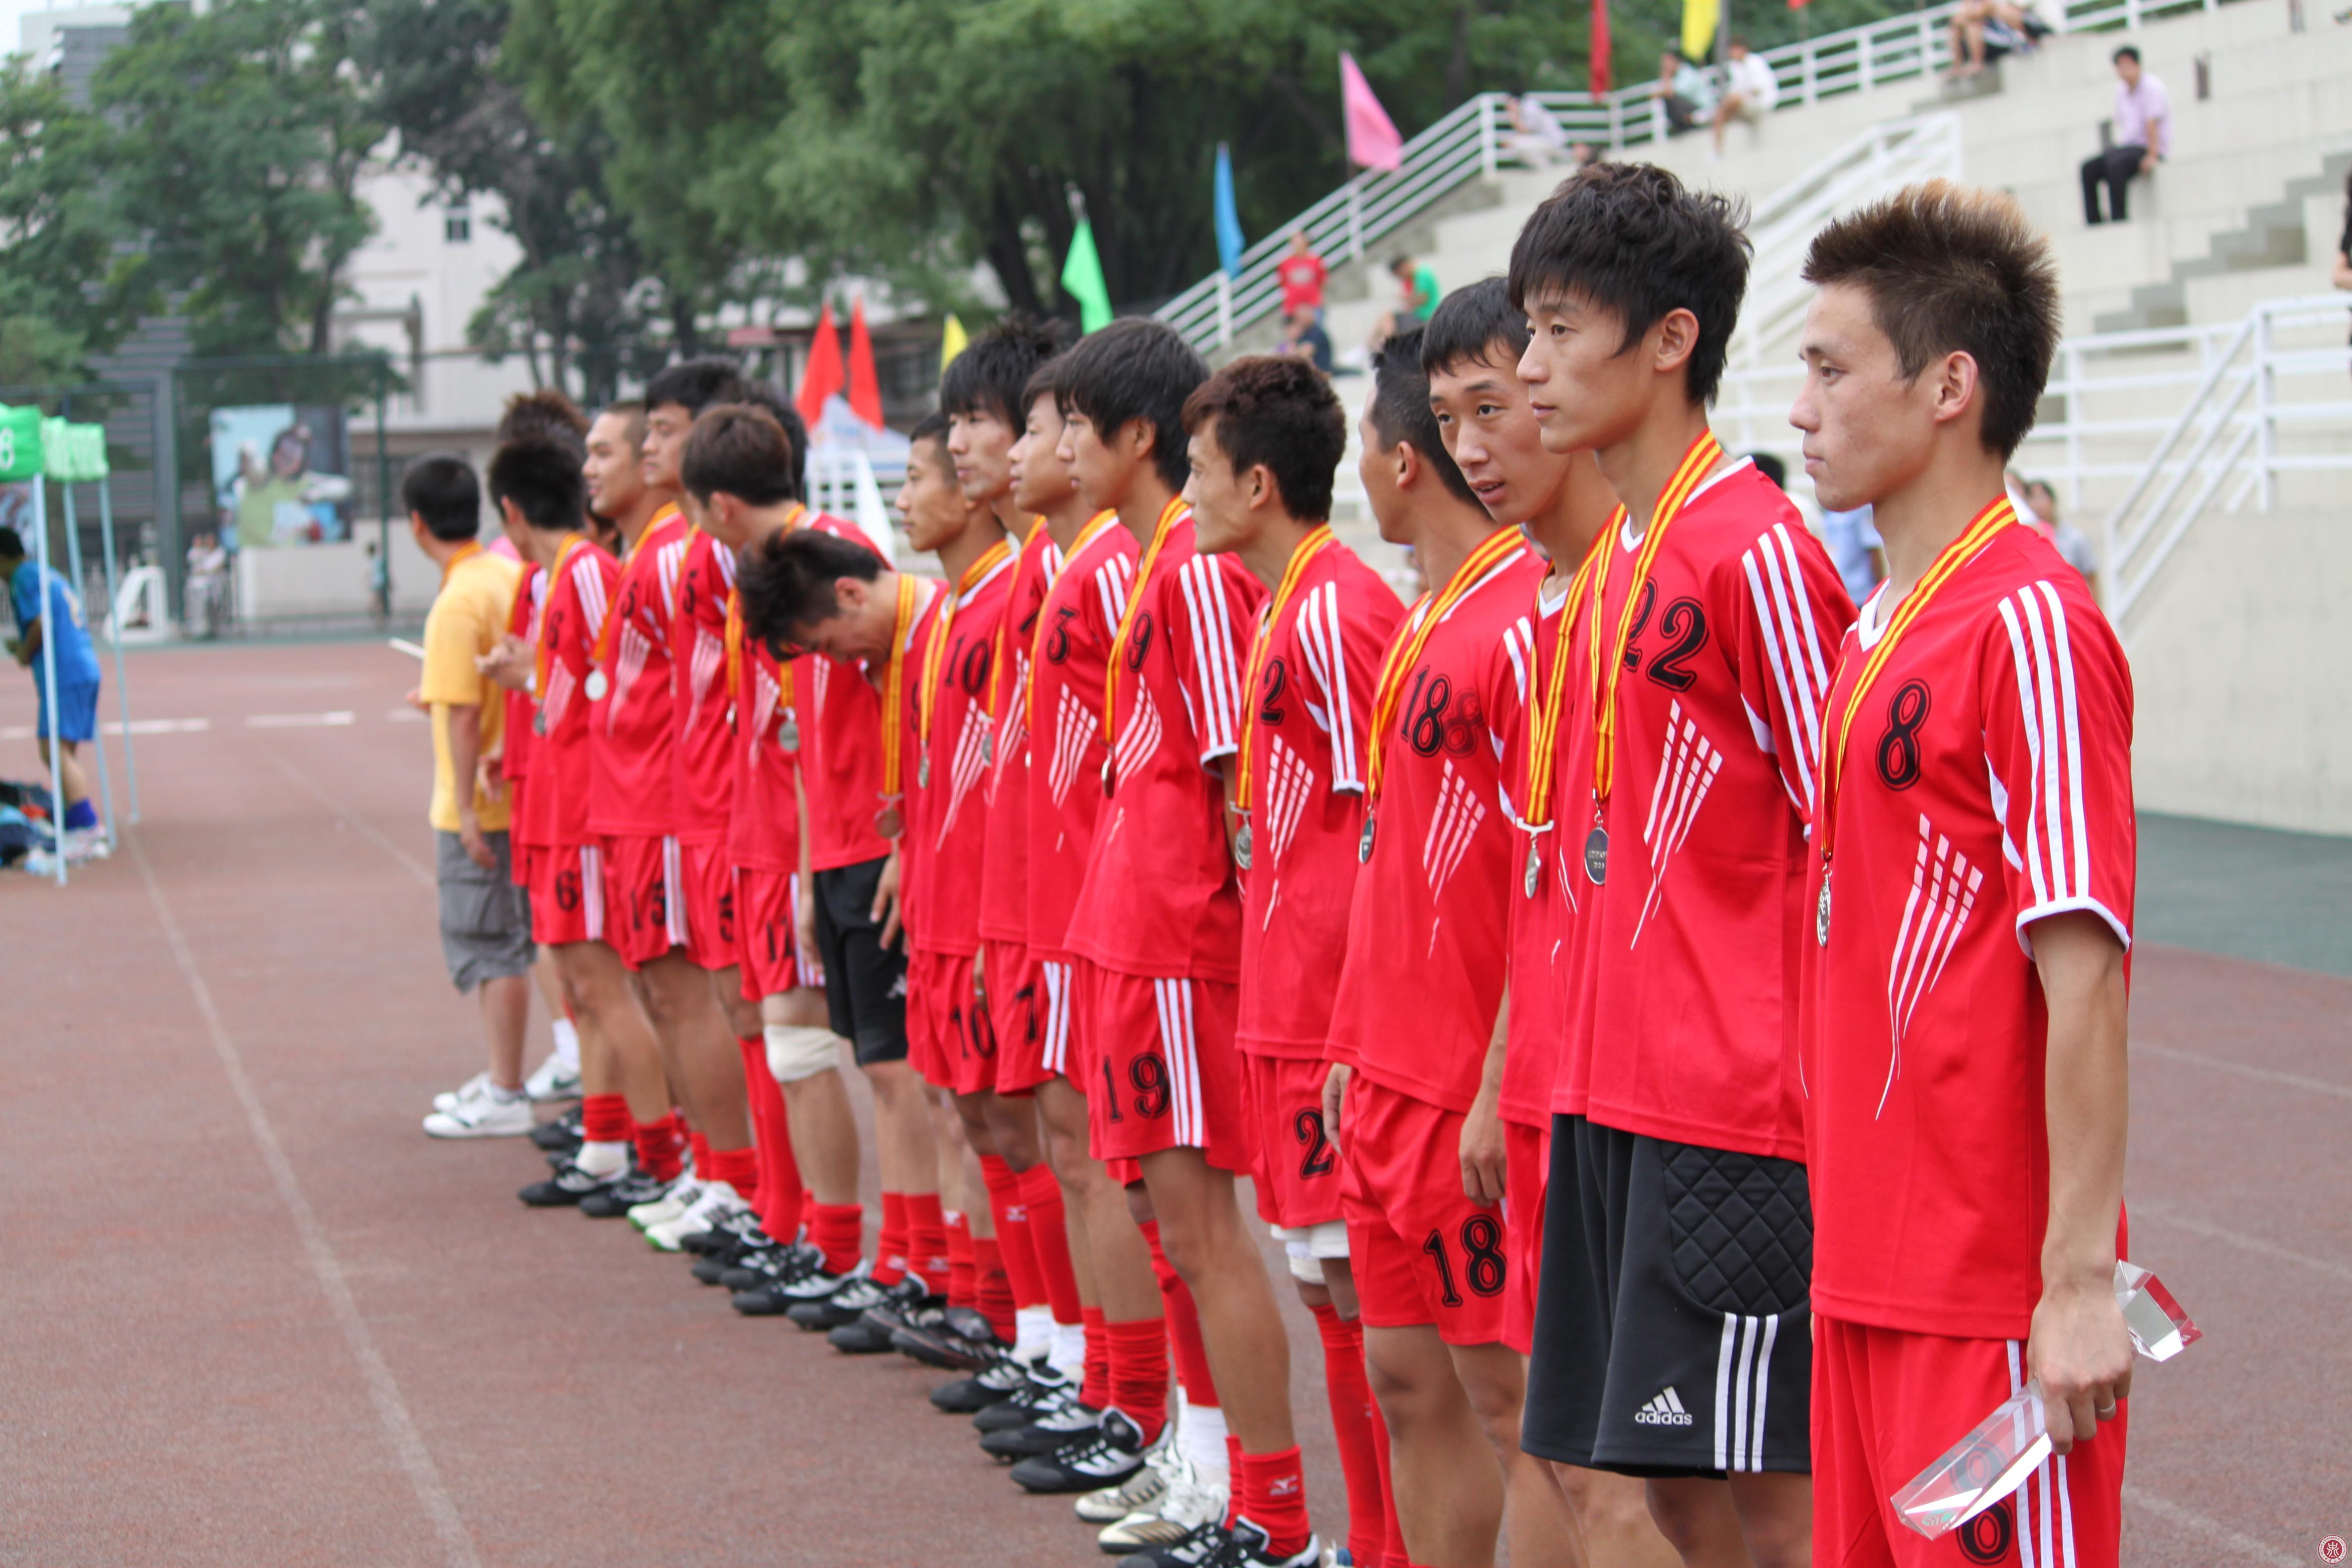 NUC Athletes Won Great Honors in the 13th Shanxi Provincial Games